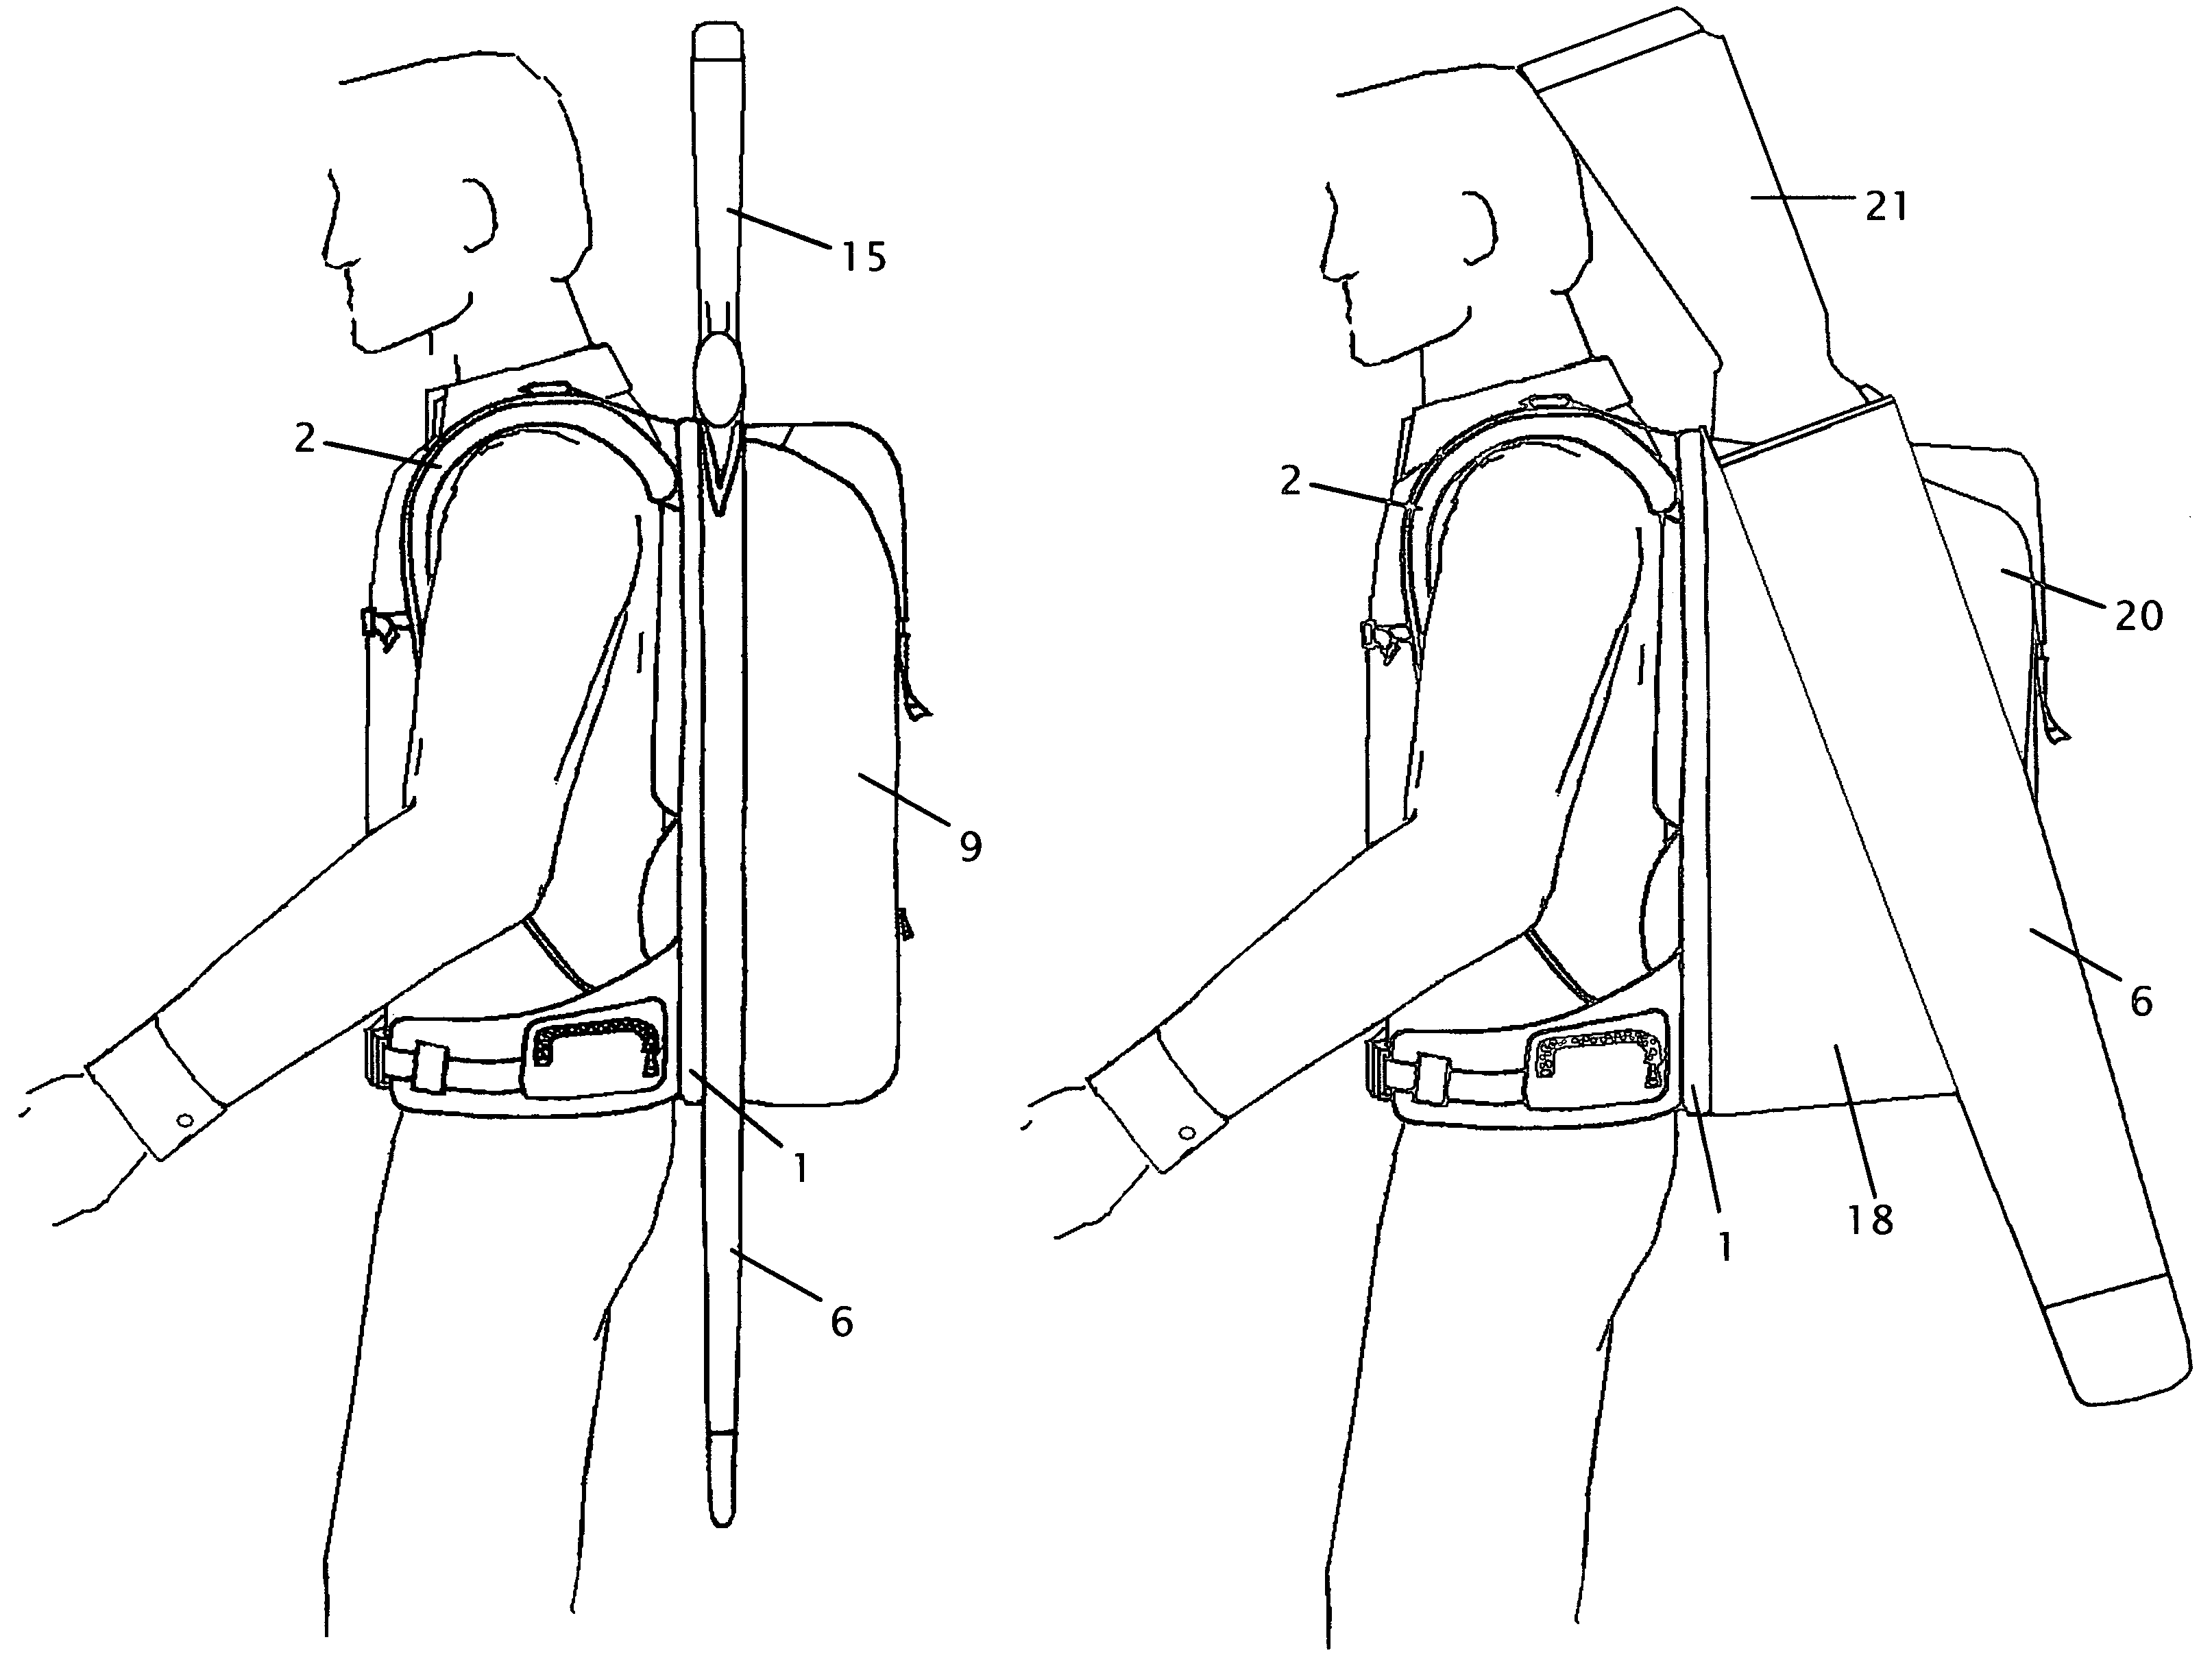 Backpack with incorporated gun scabbard